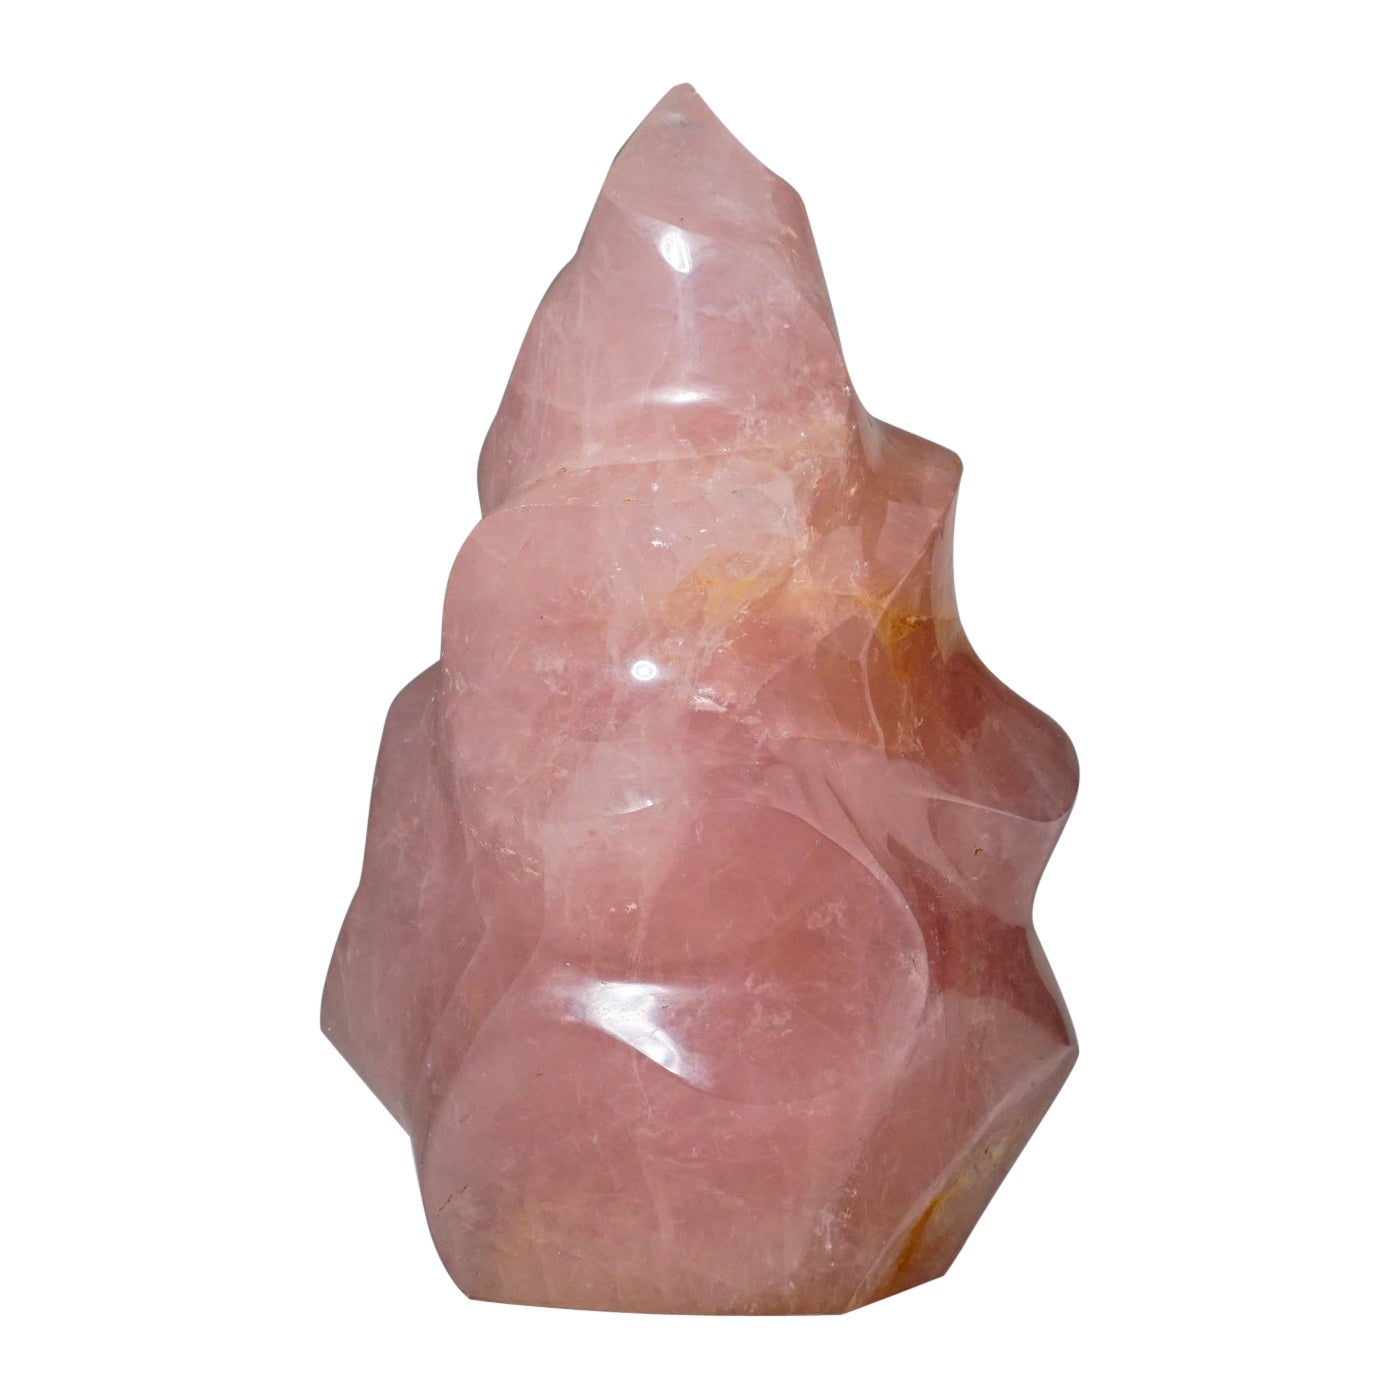 Polished Rose Quartz Flame Freeform From Brazil (6.7 lbs) For Sale